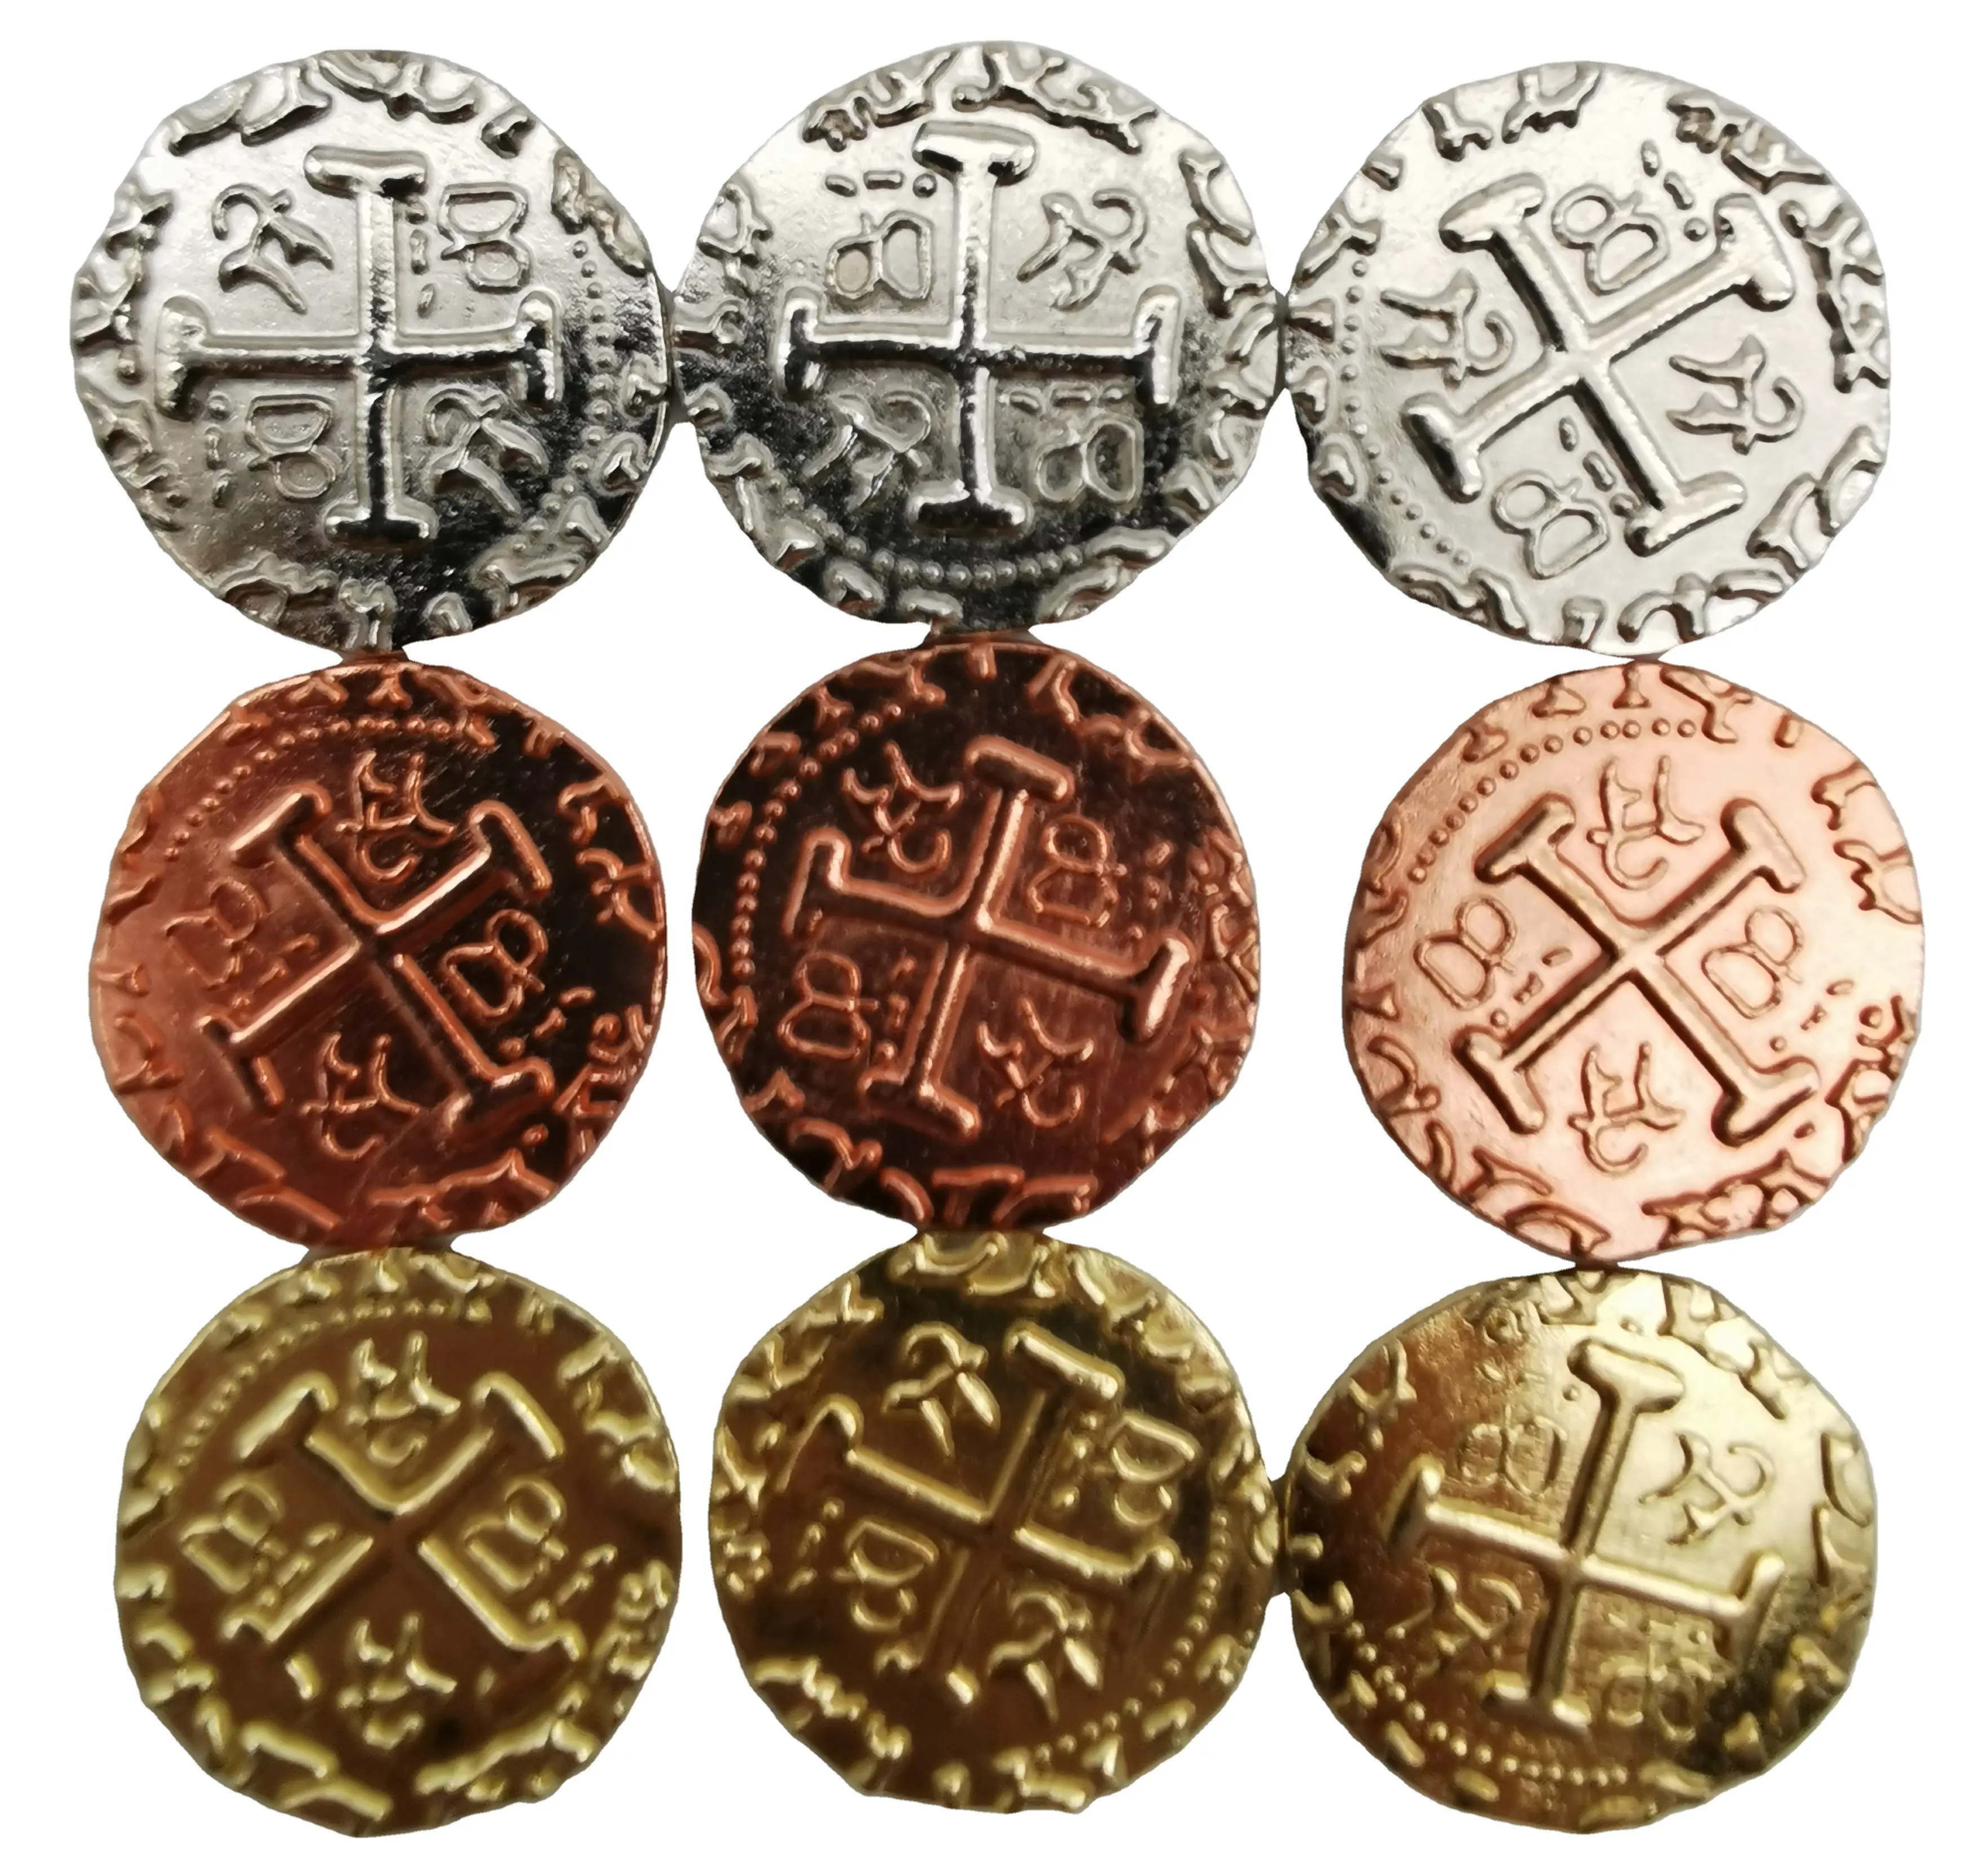 metal game coin cheaper price gold and silver multi-size antique metal pirate coins for game